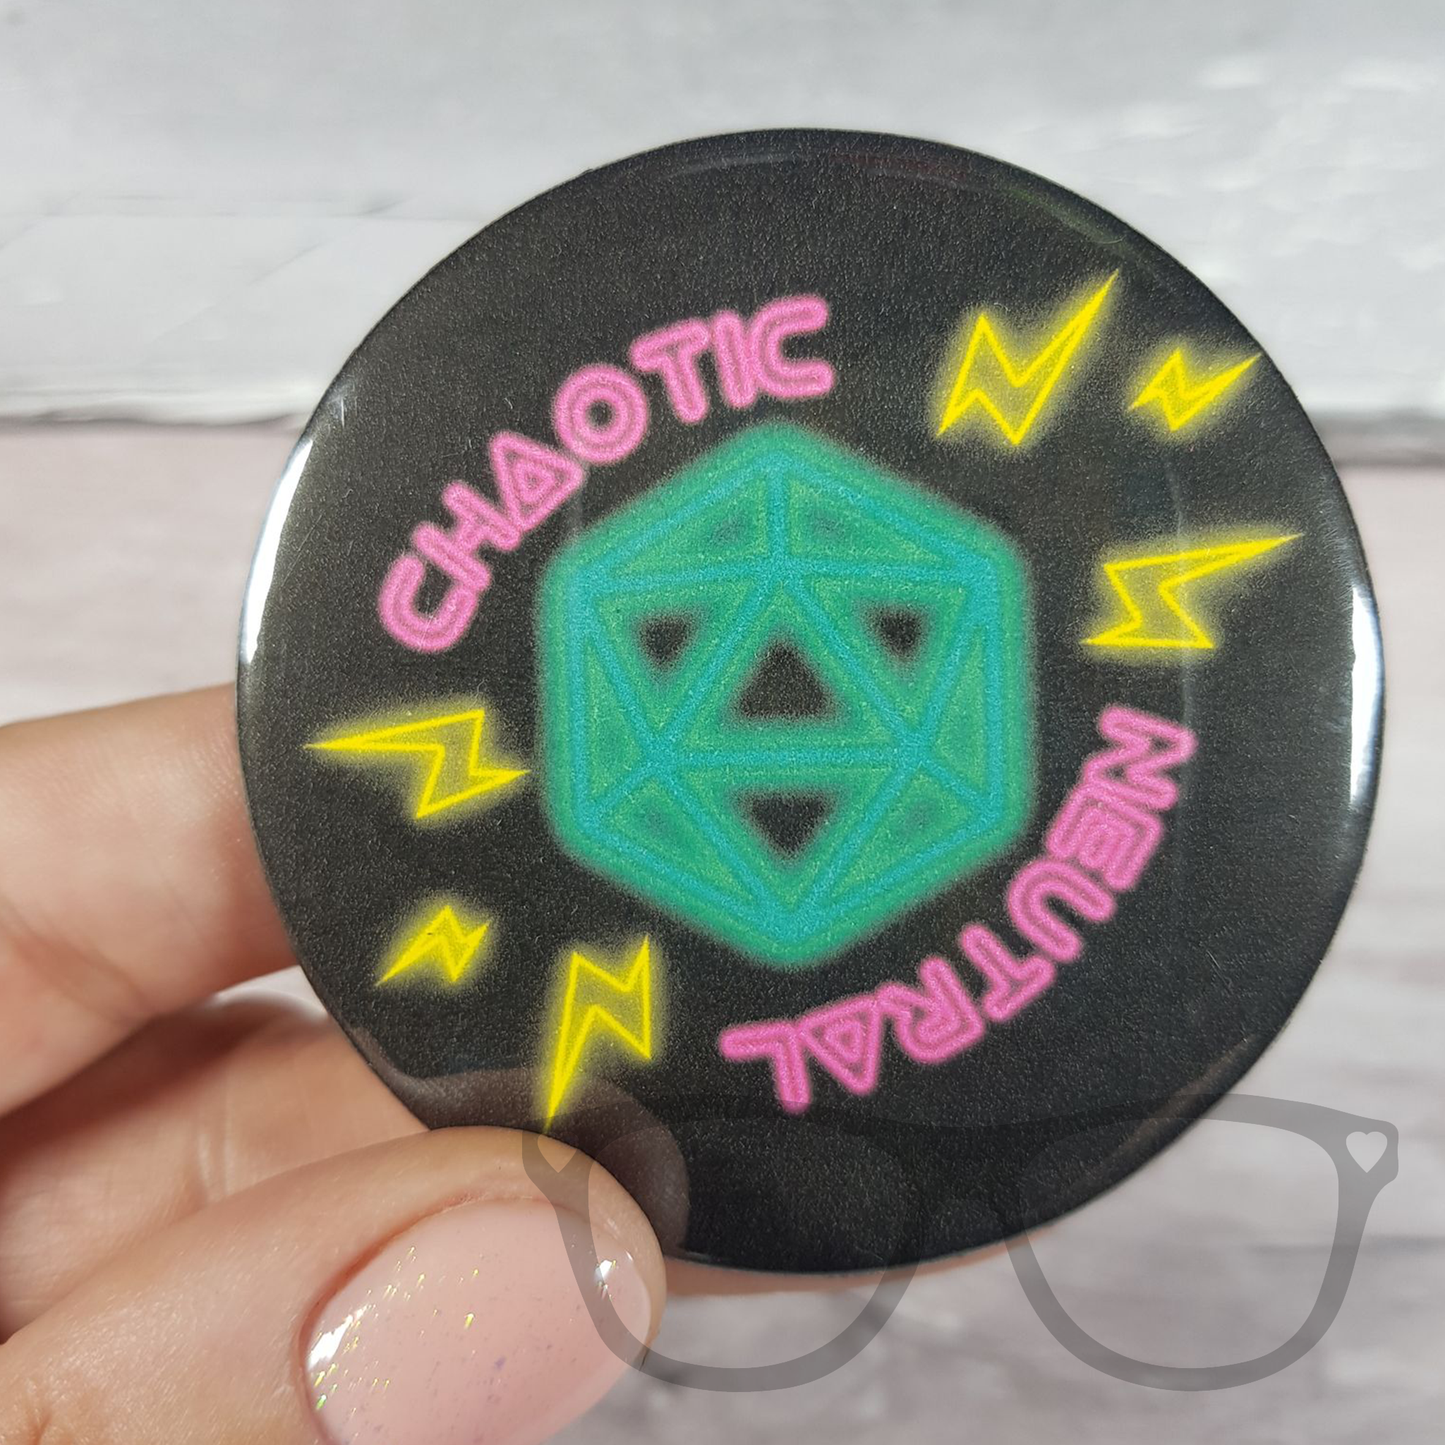 Chaotic Neutral badge in a cyberpunk style. A green 20 sided dice icon with Chaotic neutral around it